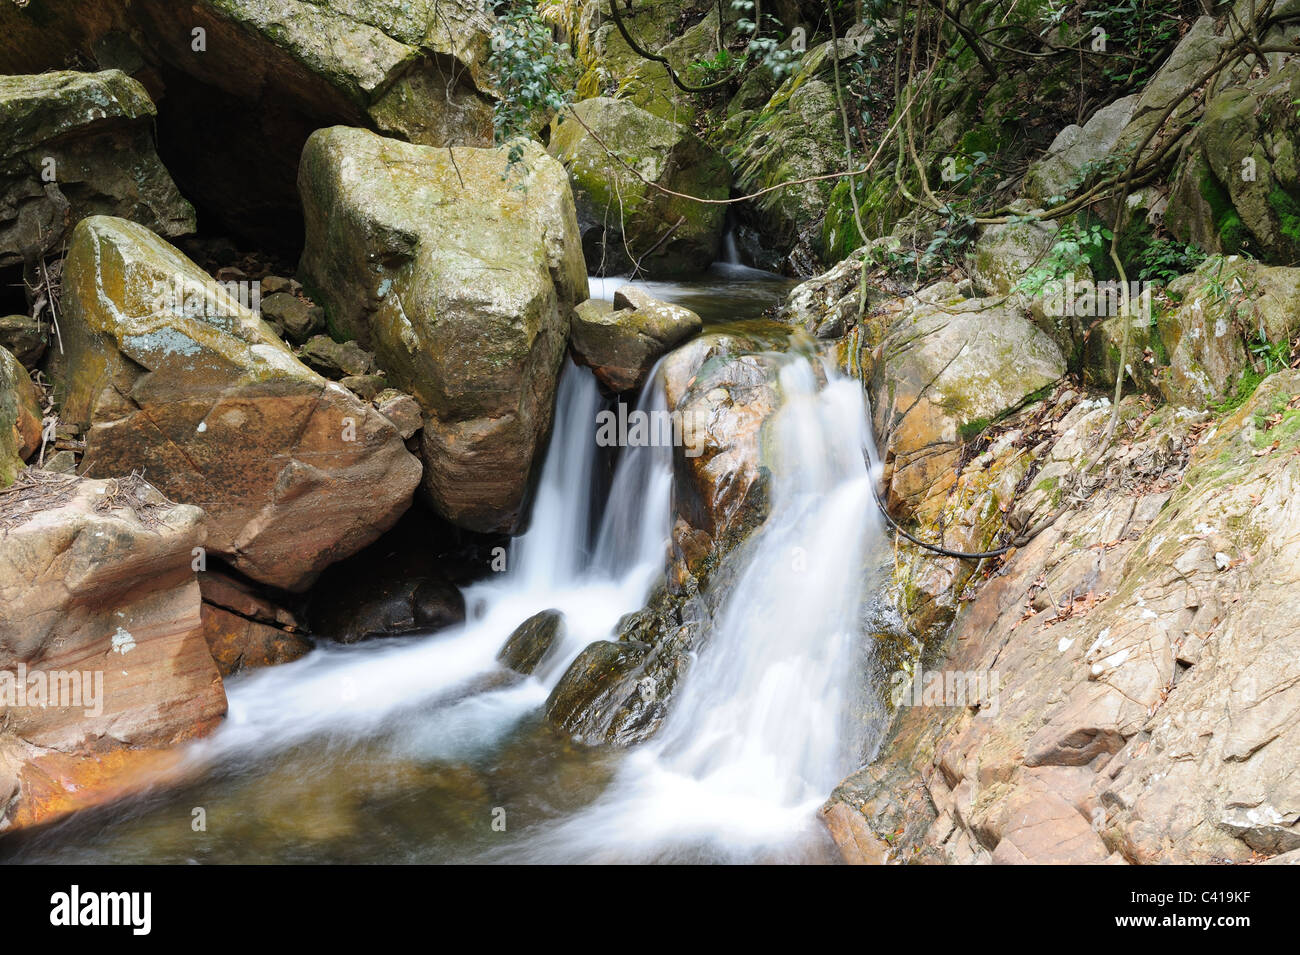 Flowing waterfall in China mountain areas Stock Photo